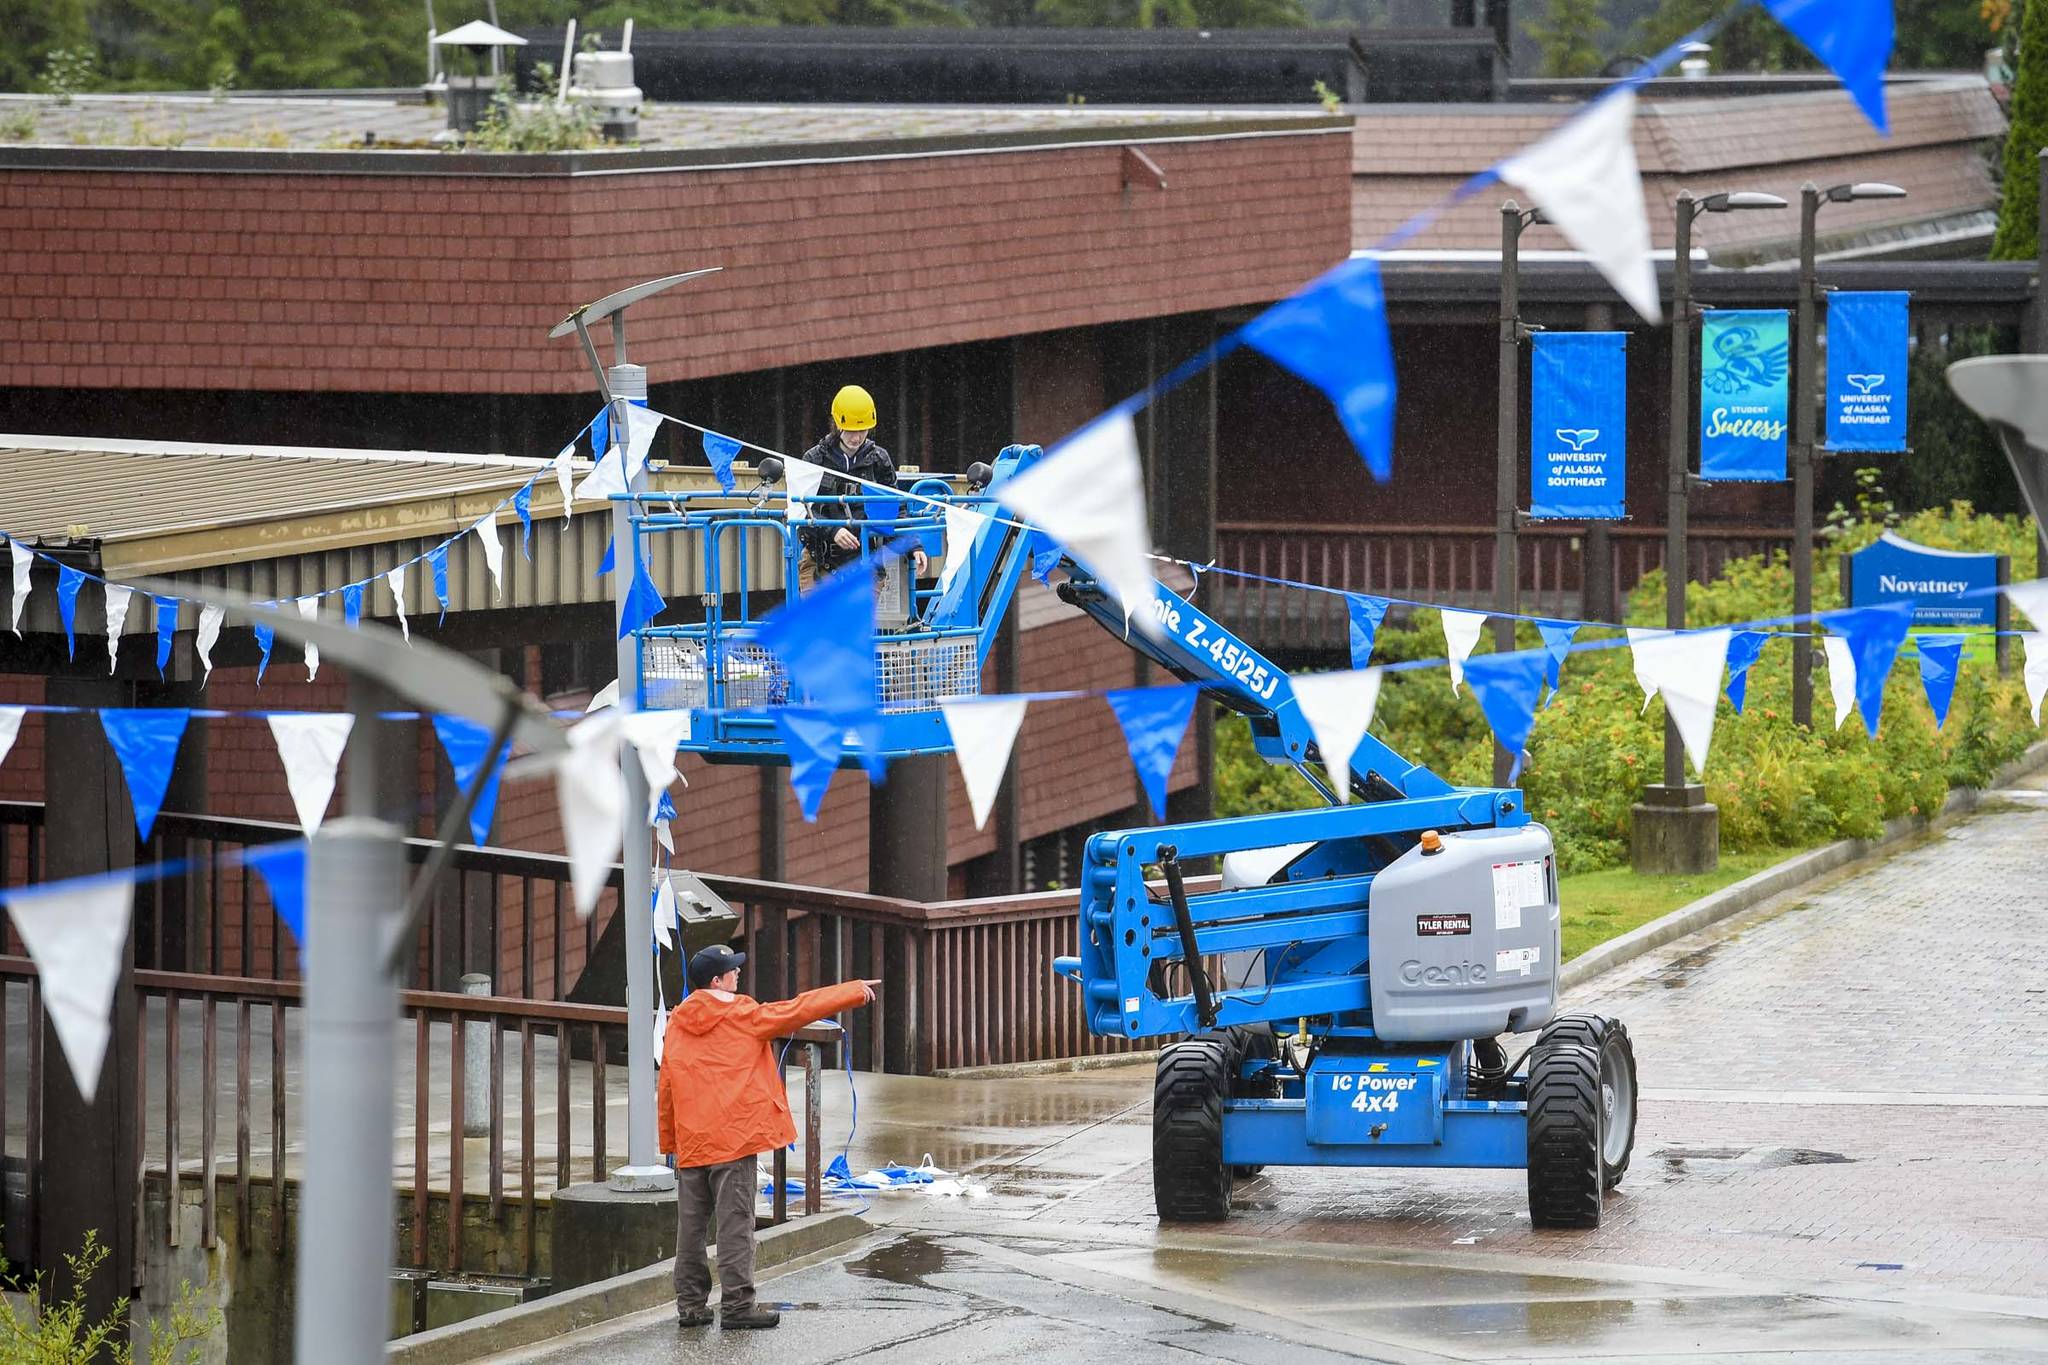 A crew hangs flags in the courtyard at the University of Alaska Southeast on Friday, Aug. 23, 2019. Classes started Monday, Aug. 26. (Michael Penn | Juneau Empire)